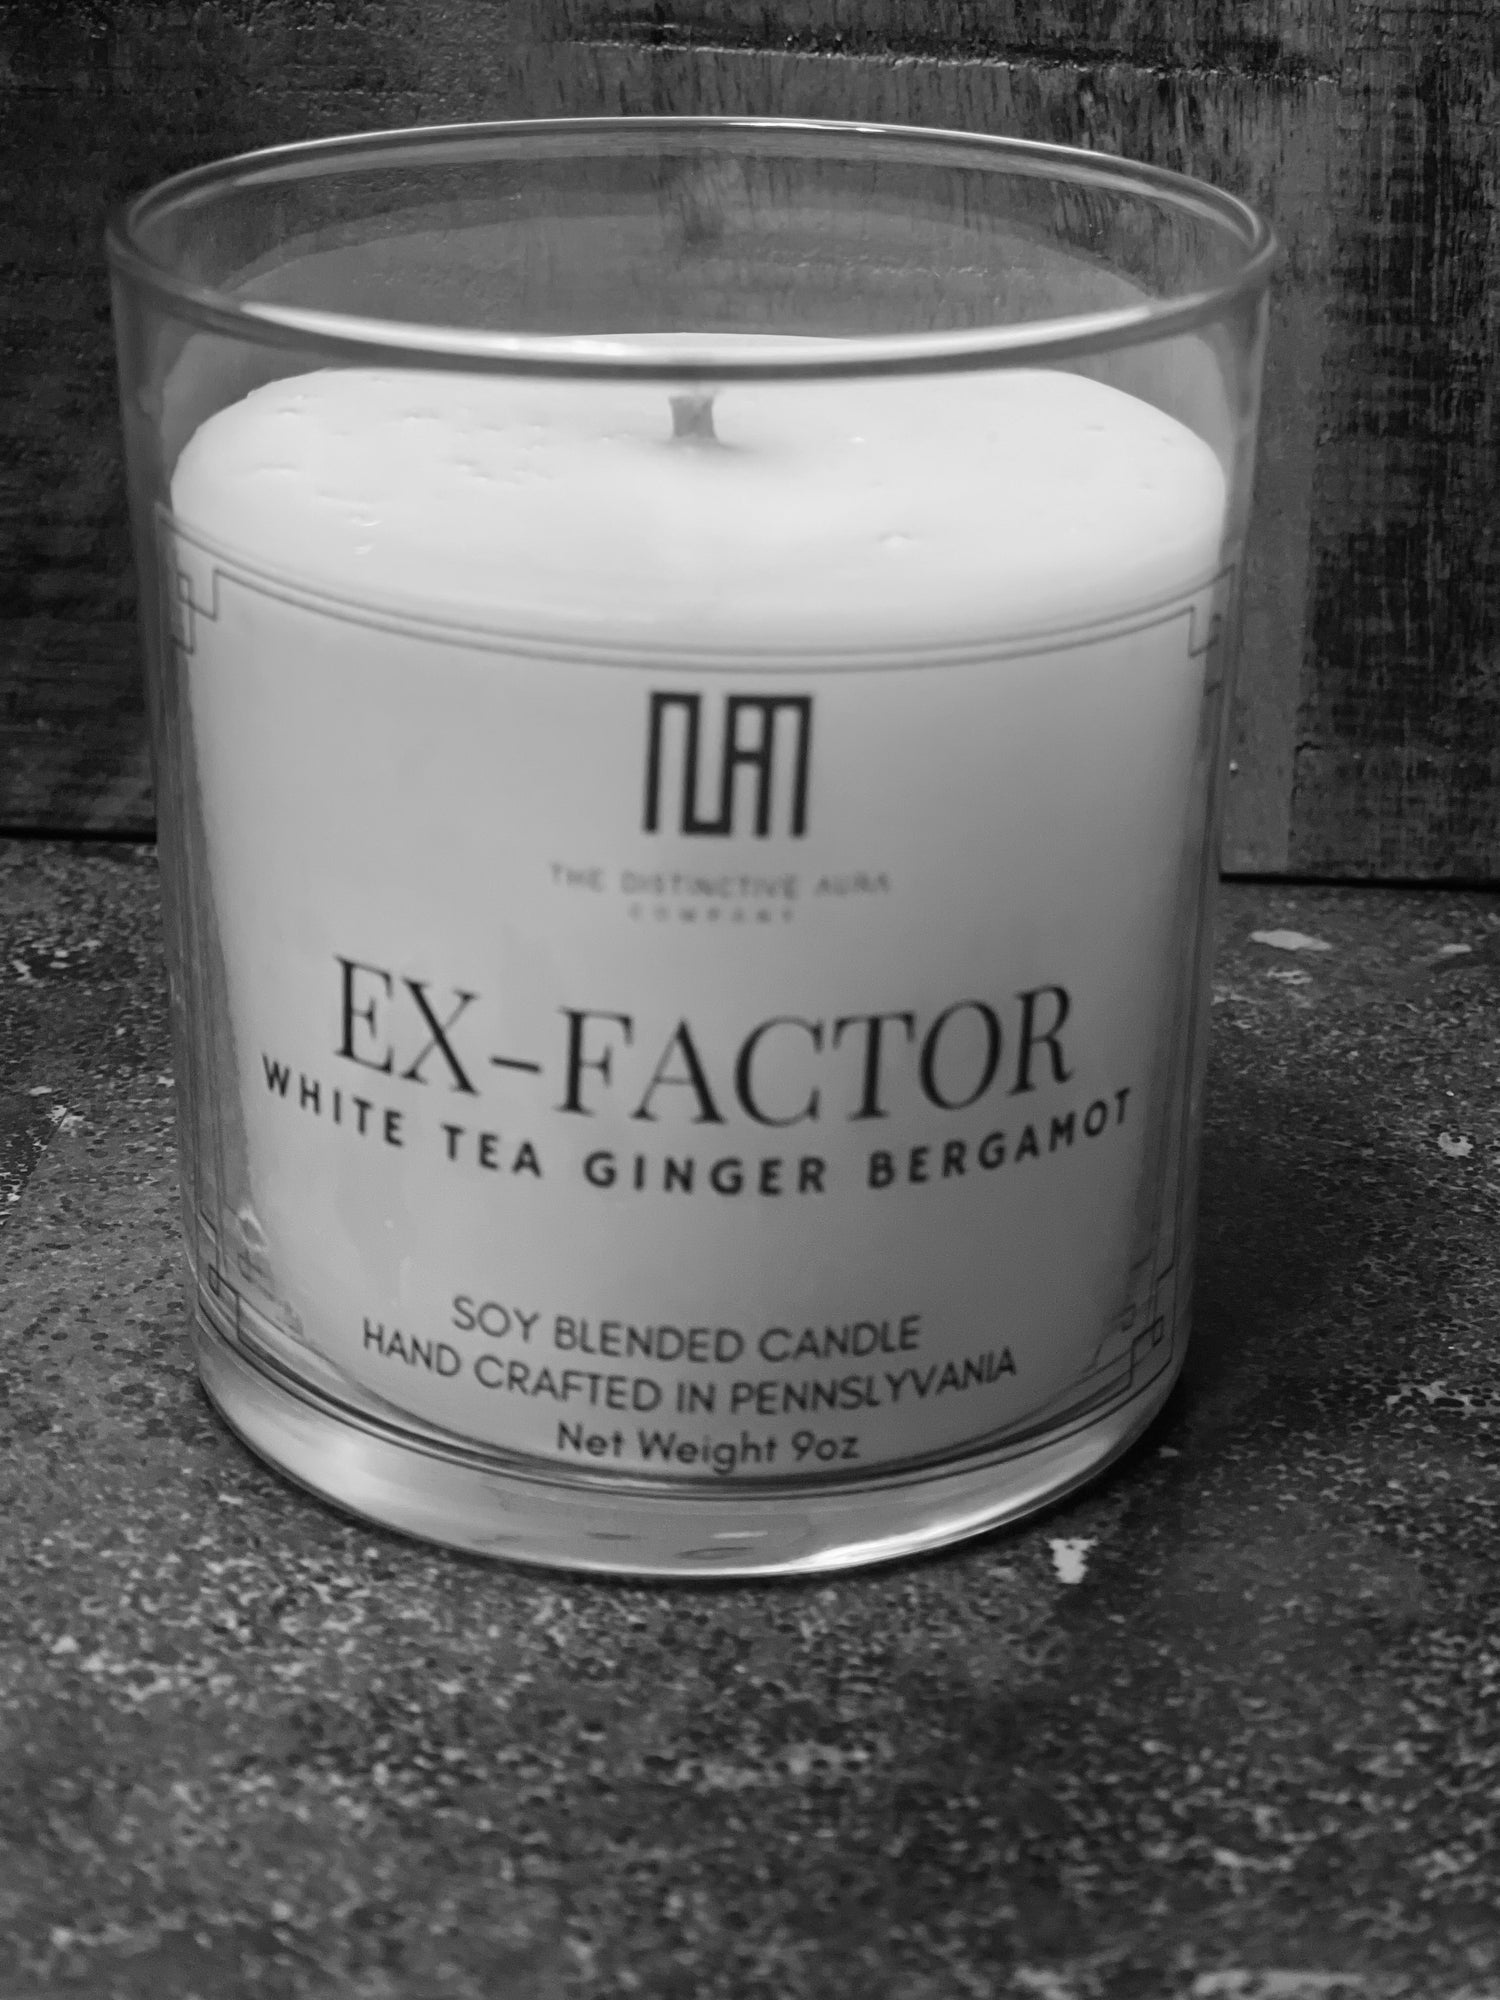 EX-FACTOR 9oz premium candle from the Distinctive Aura Company